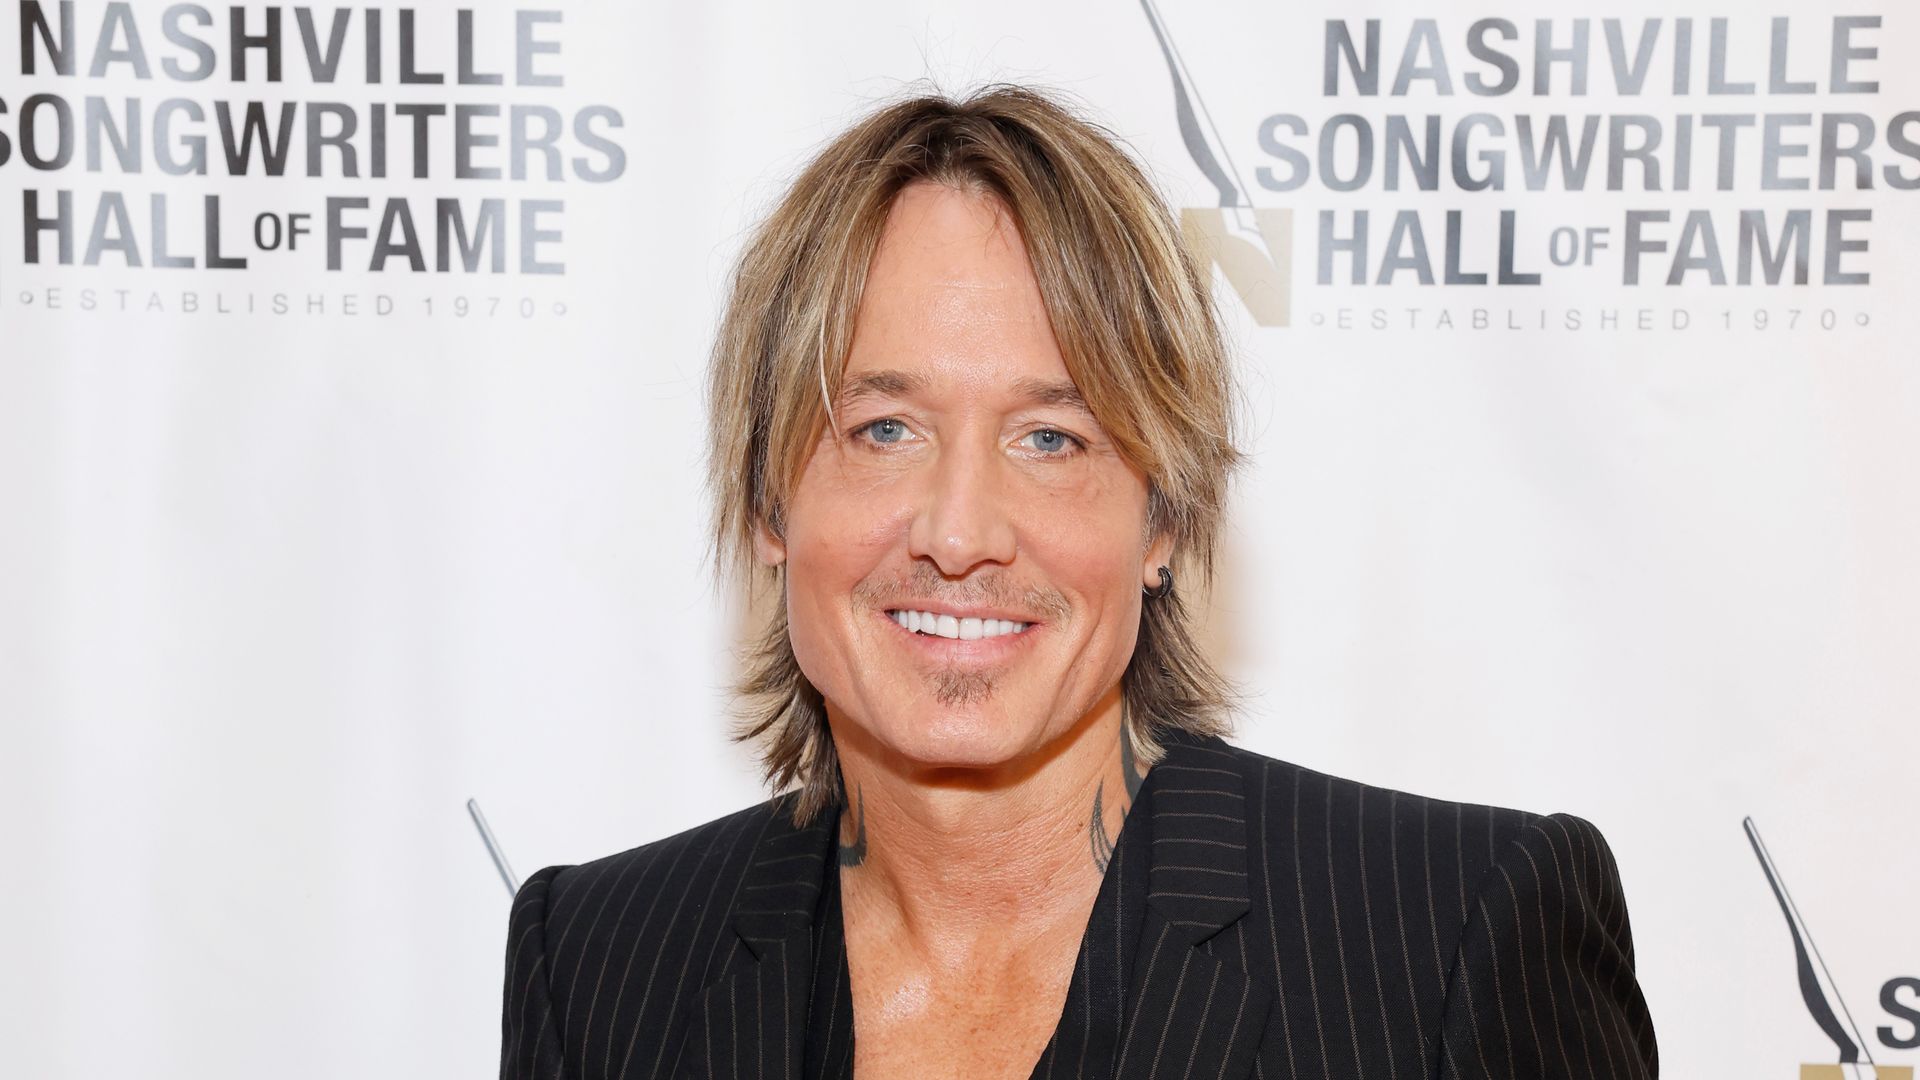 Keith Urban attends the 53rd Anniversary Nashville Songwriters Hall of Fame Gala at Music City Center on October 11, 2023 in Nashville, Tennessee.